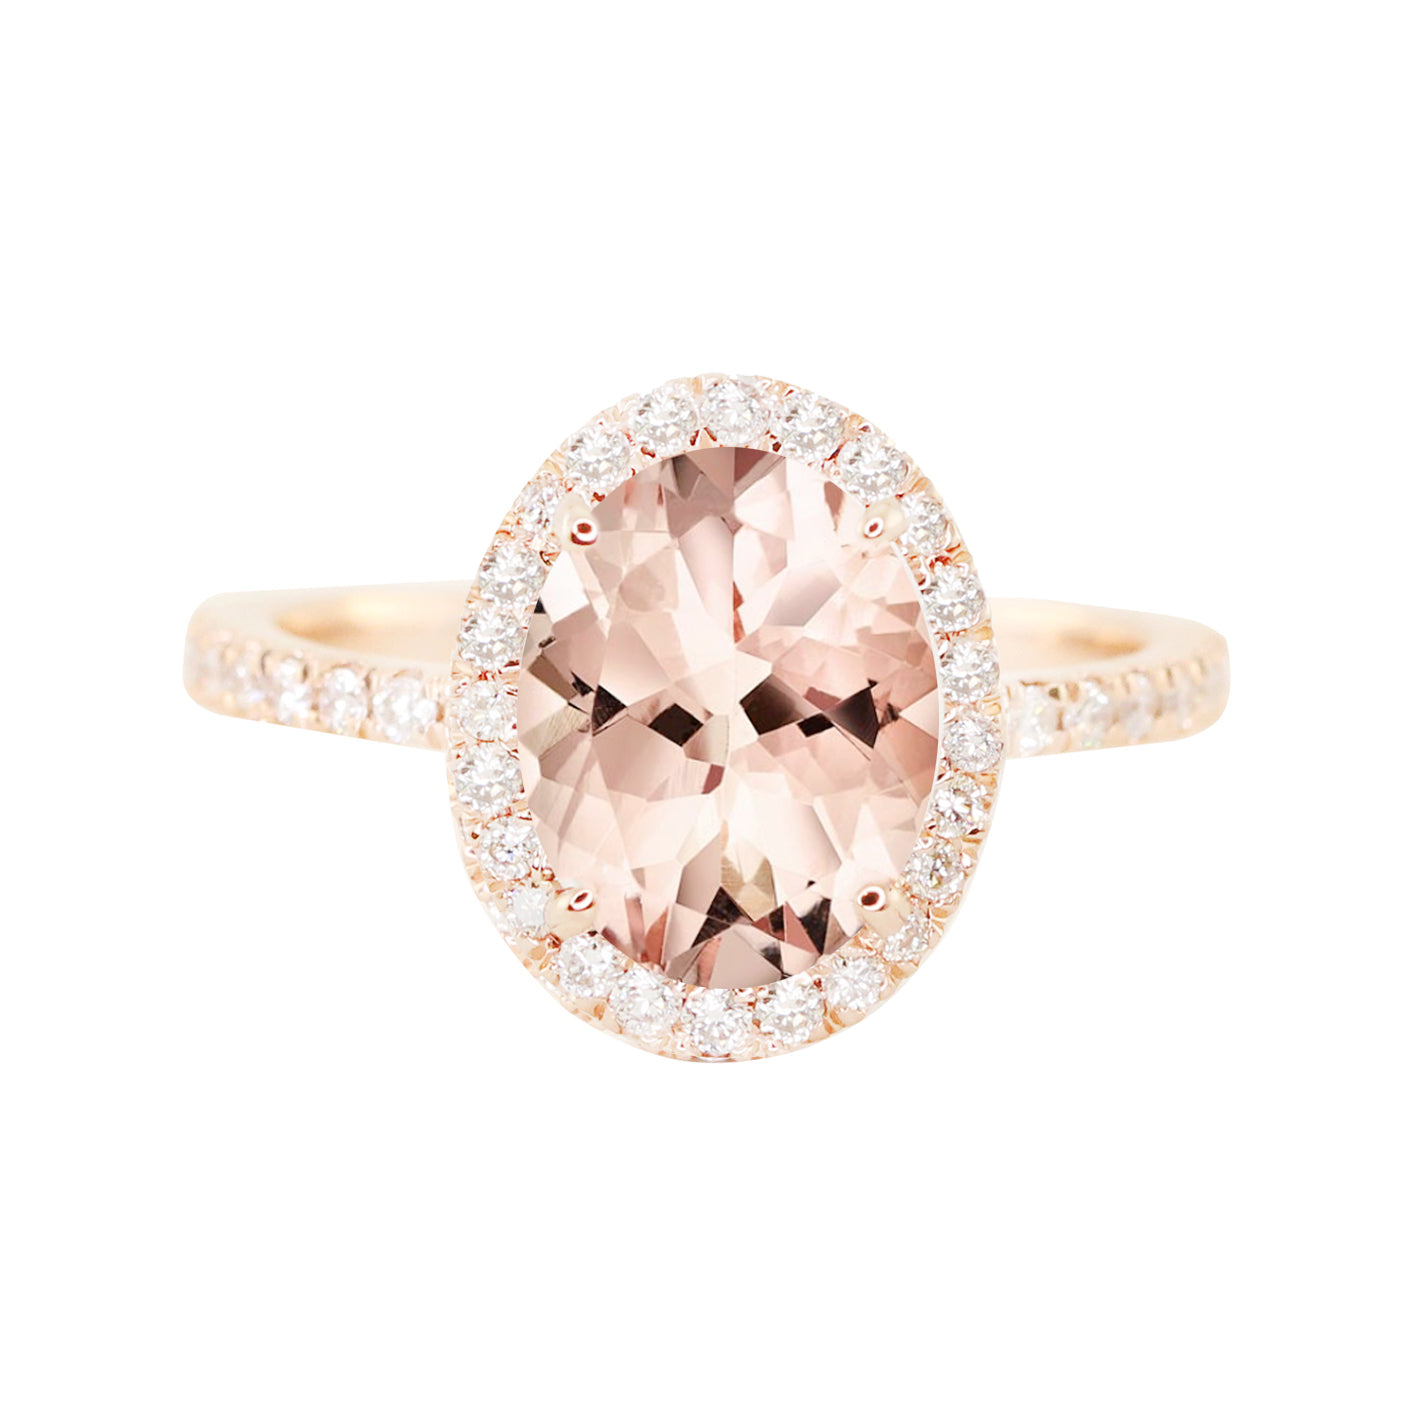 14kt gold and diamond solitaire morganite eternity ring with halo - Luna Skye